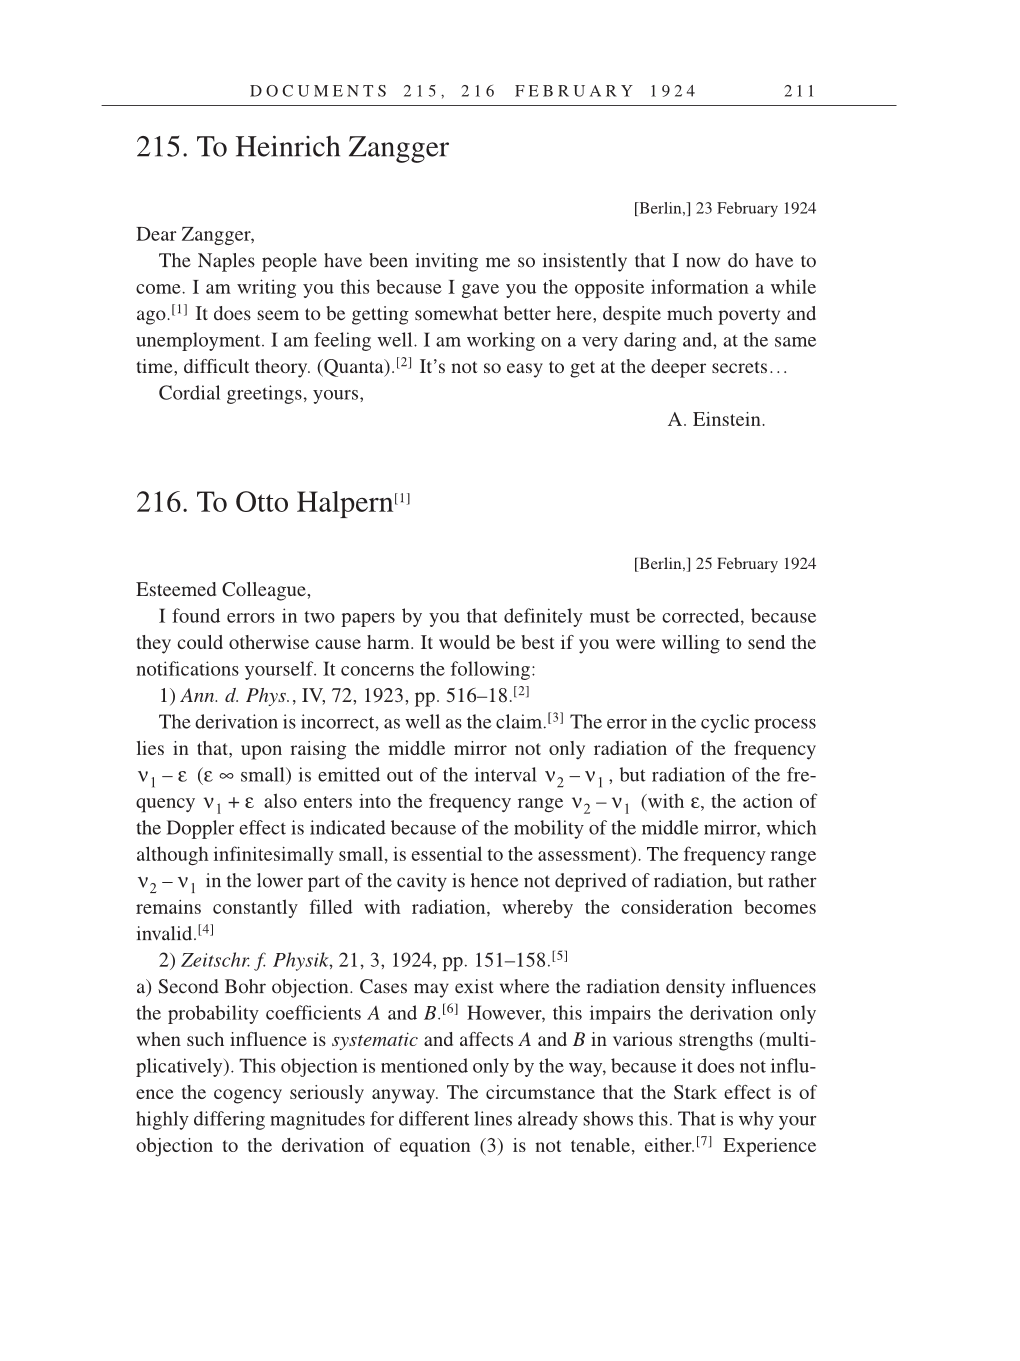 Volume 14: The Berlin Years: Writings & Correspondence, April 1923-May 1925 (English Translation Supplement) page 211